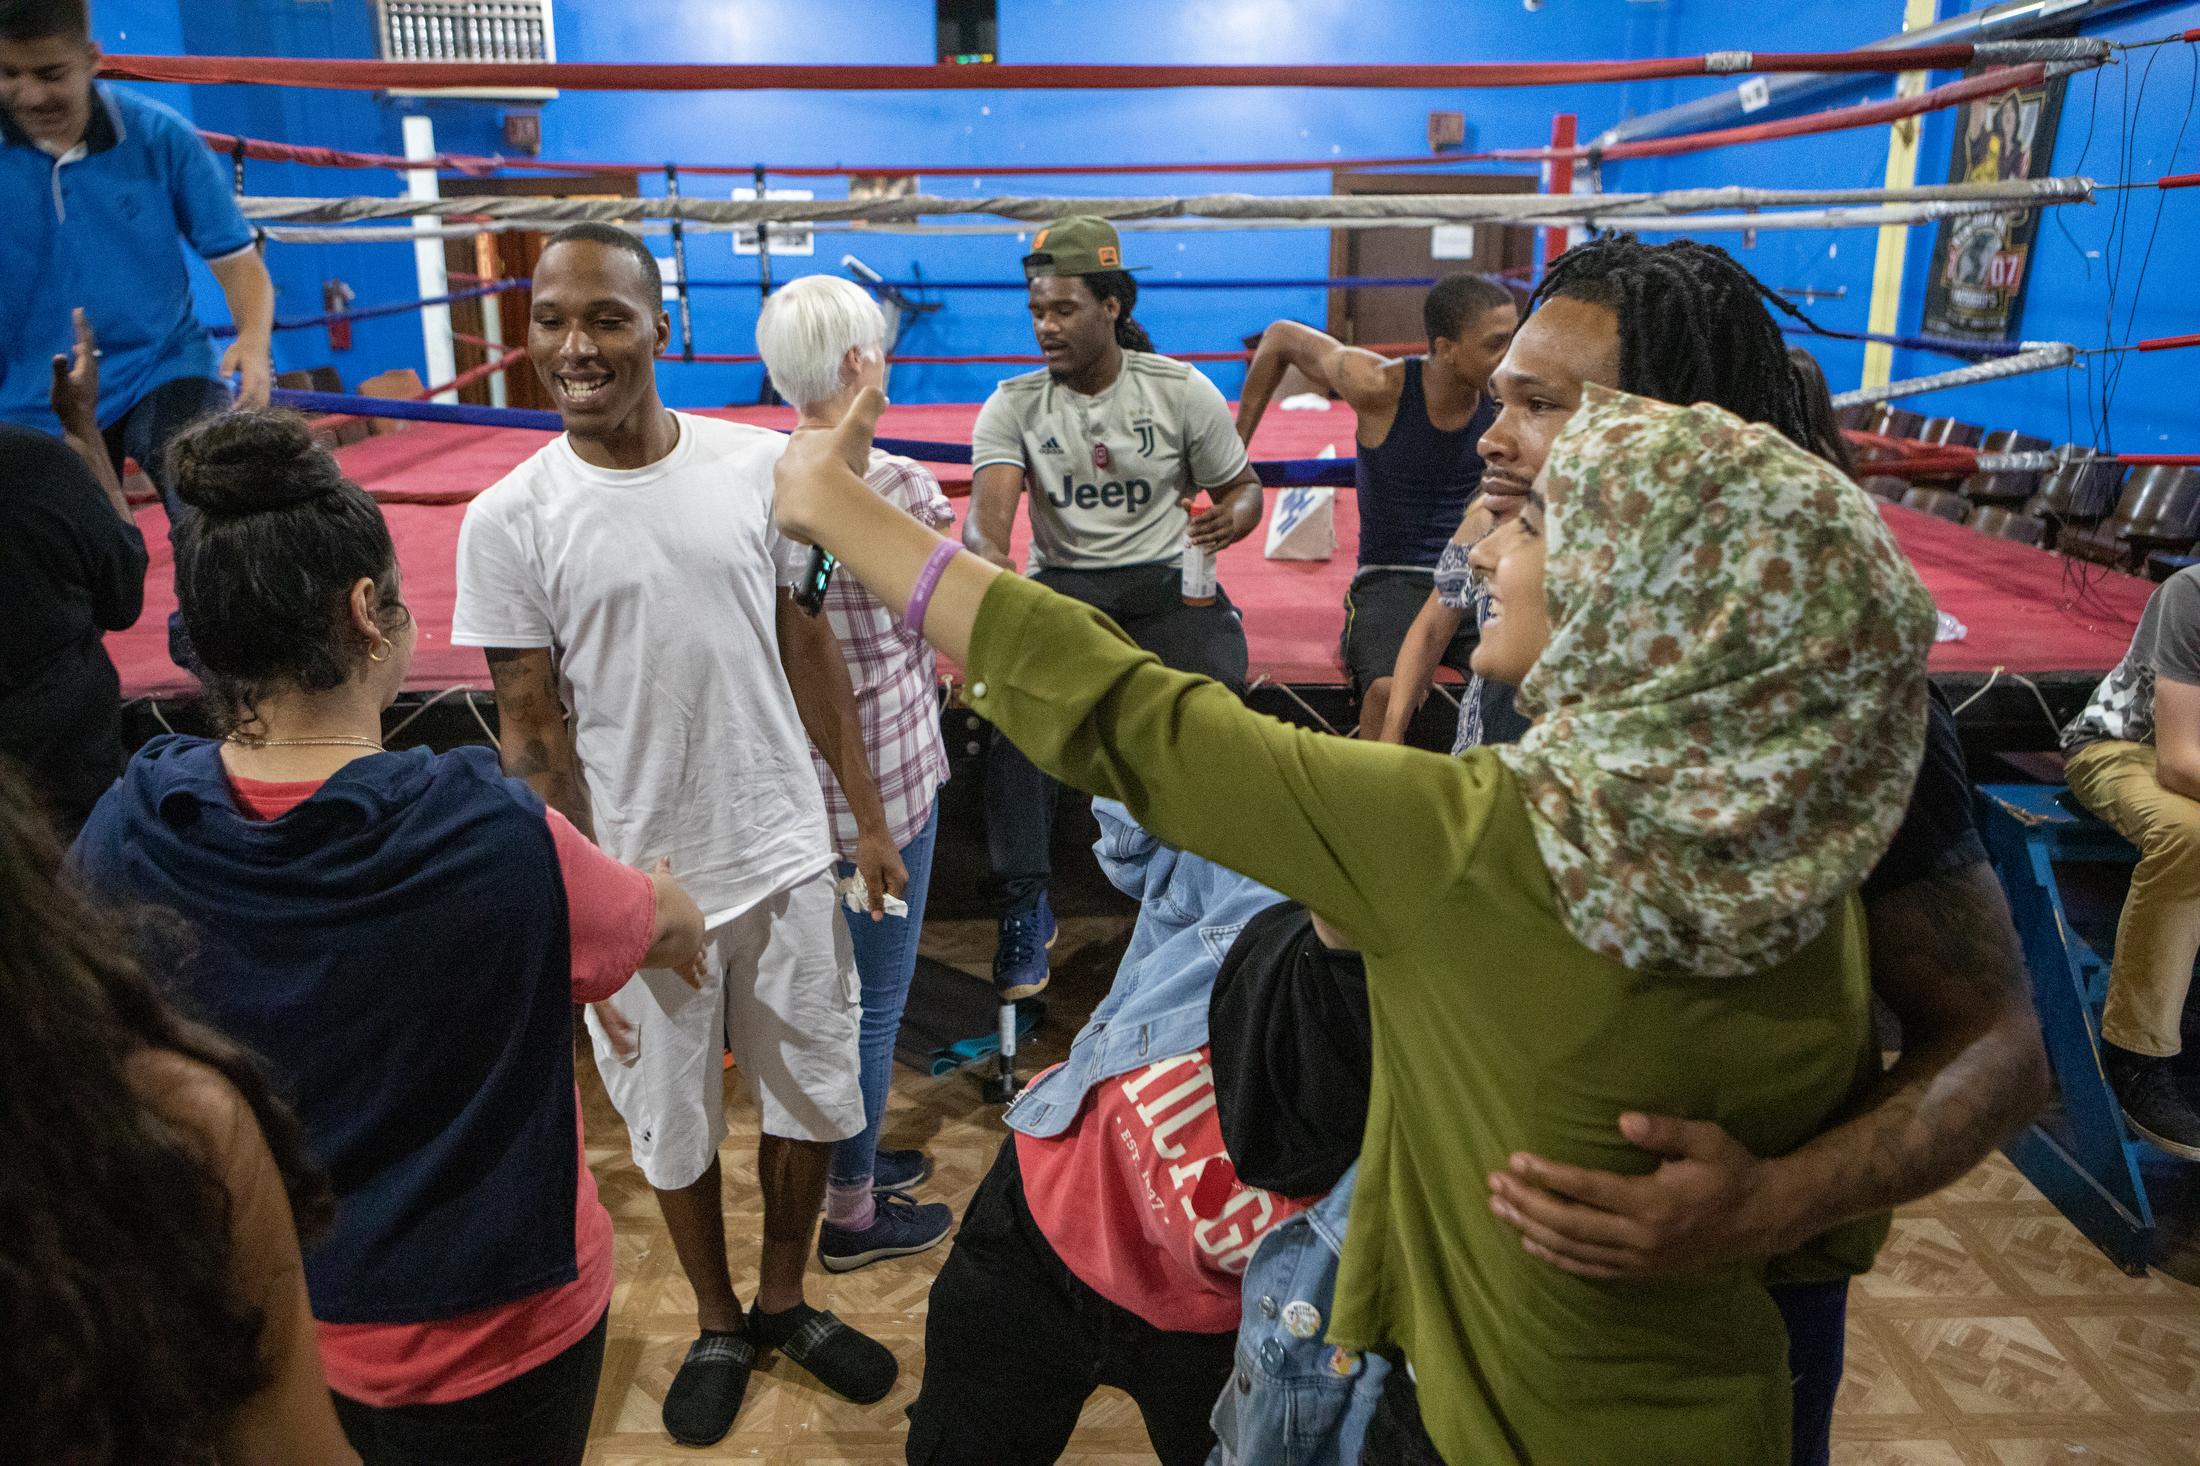 10 years in a boxing gym - Iraqui student group visits the Crushers – two groups of...